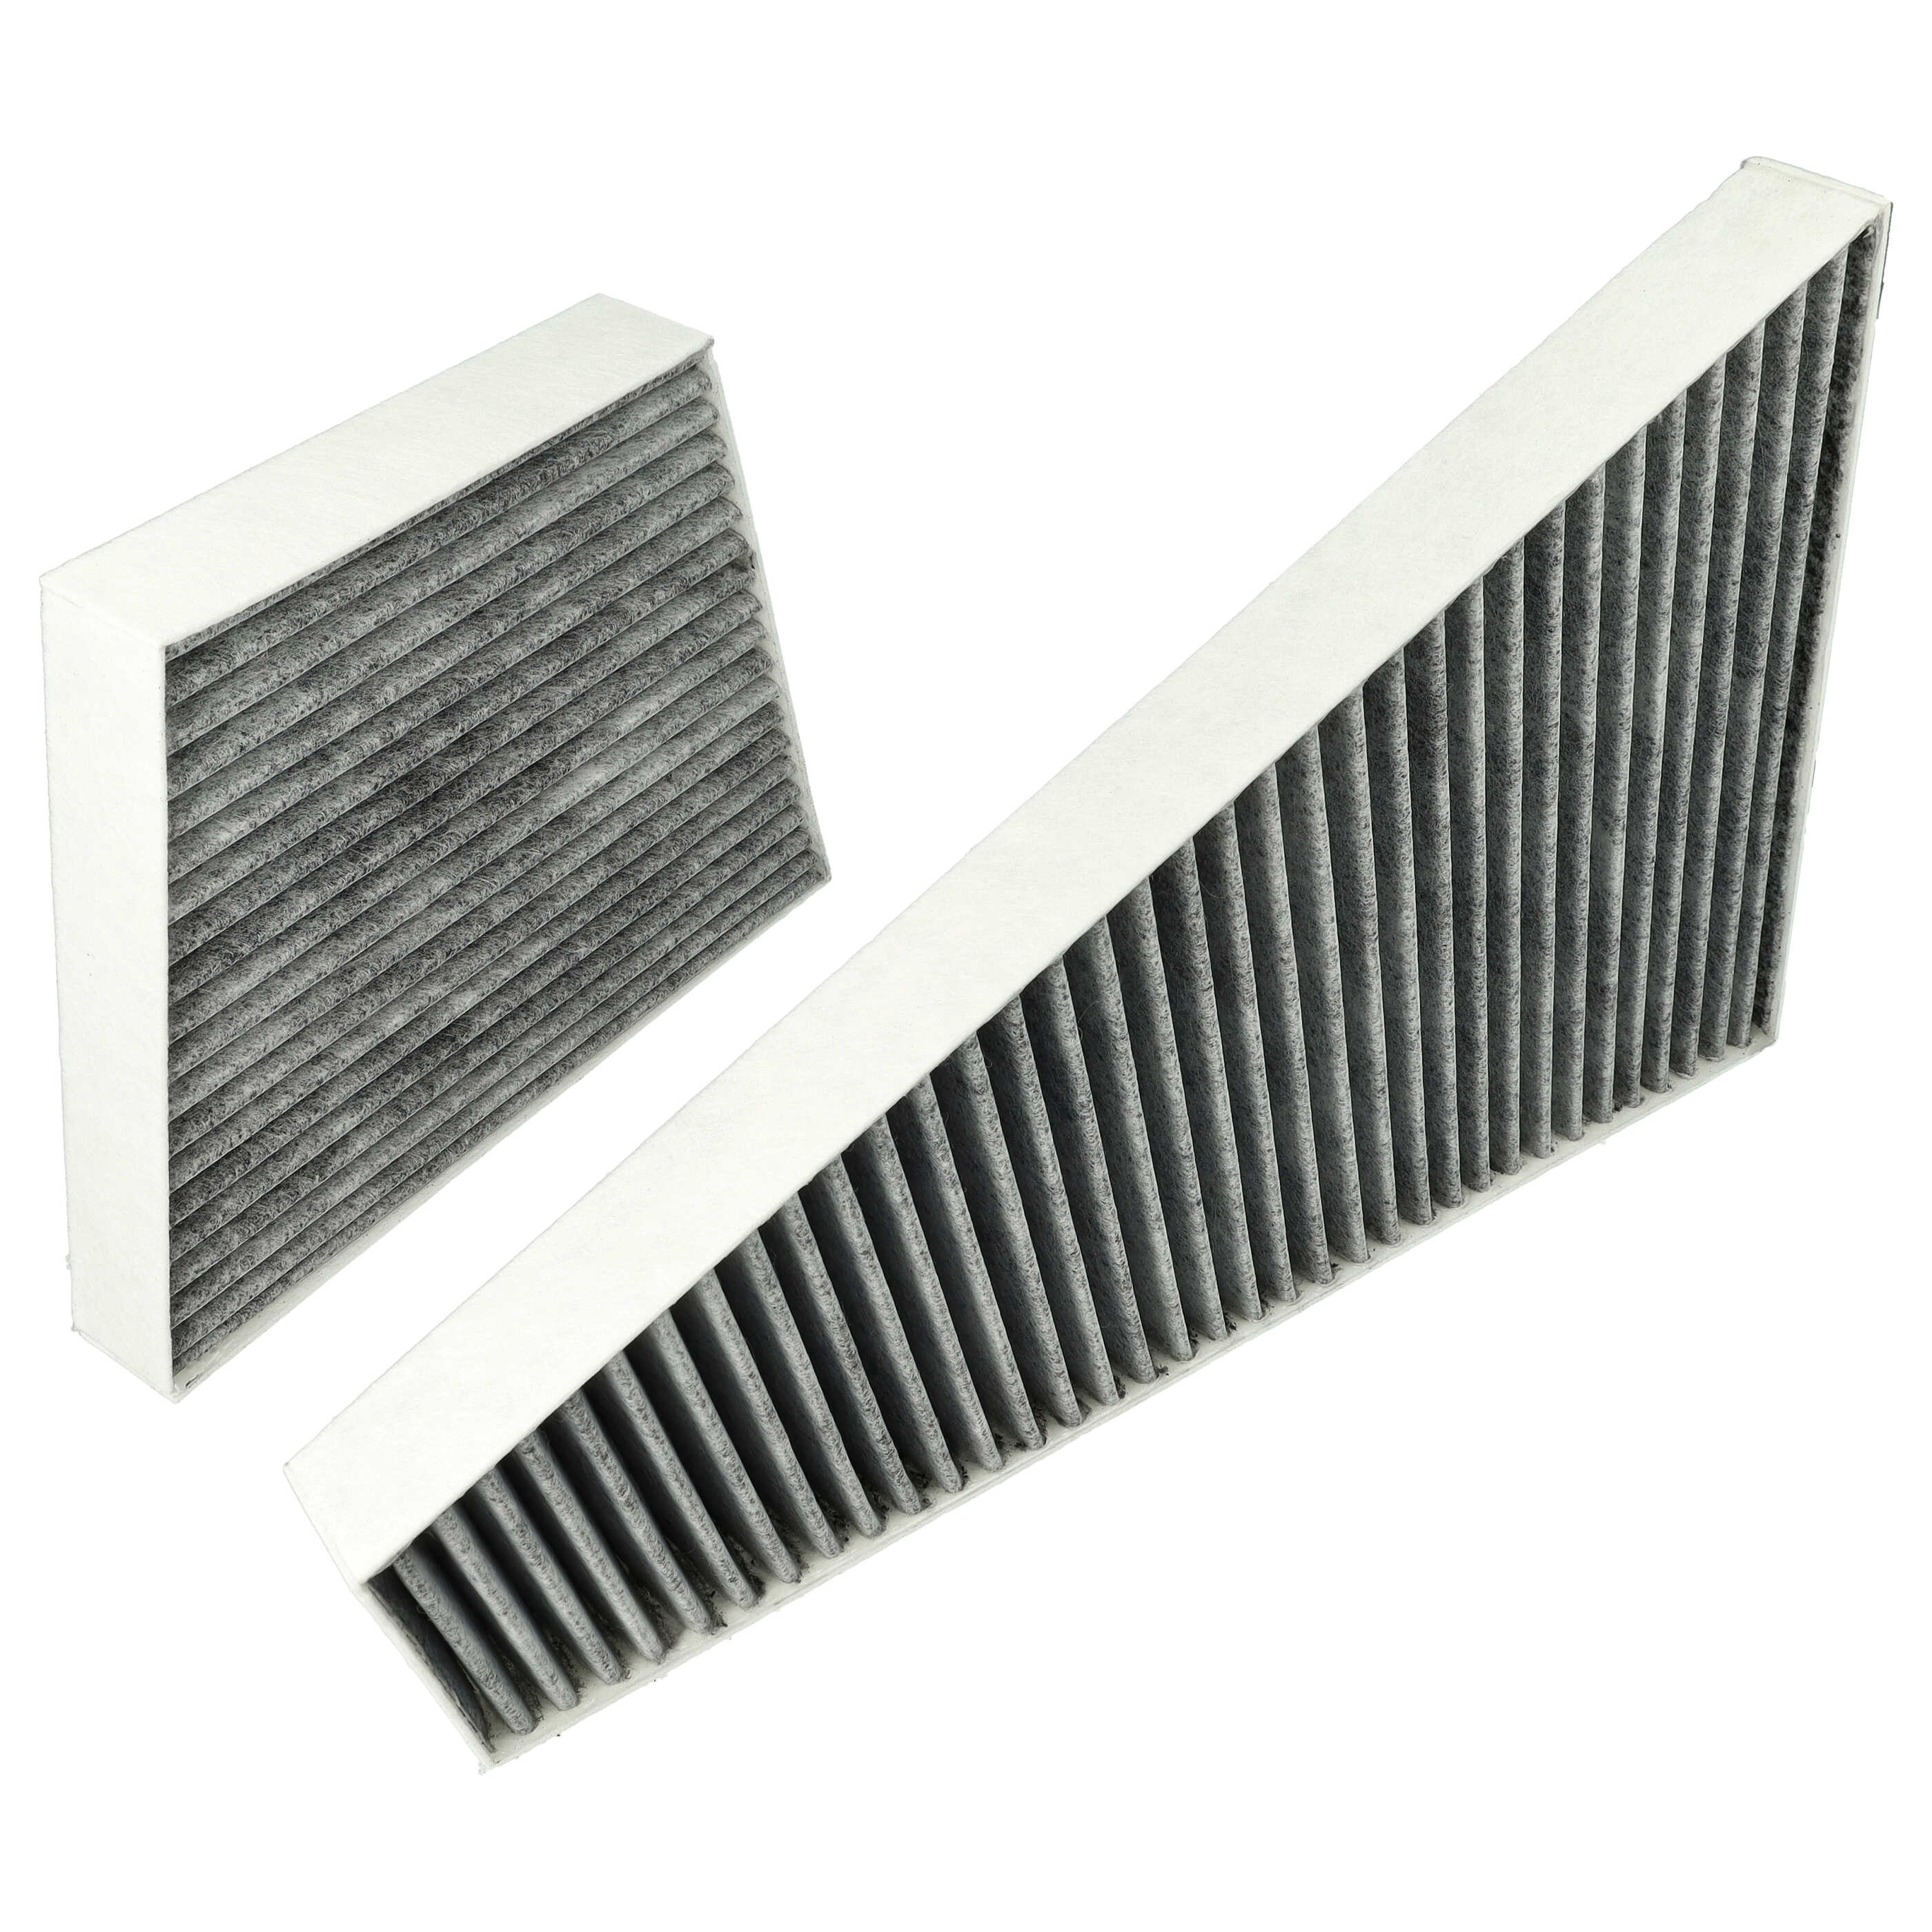 2x Cabin Air Filter replaces 1A First Automotive K30383-2 etc.